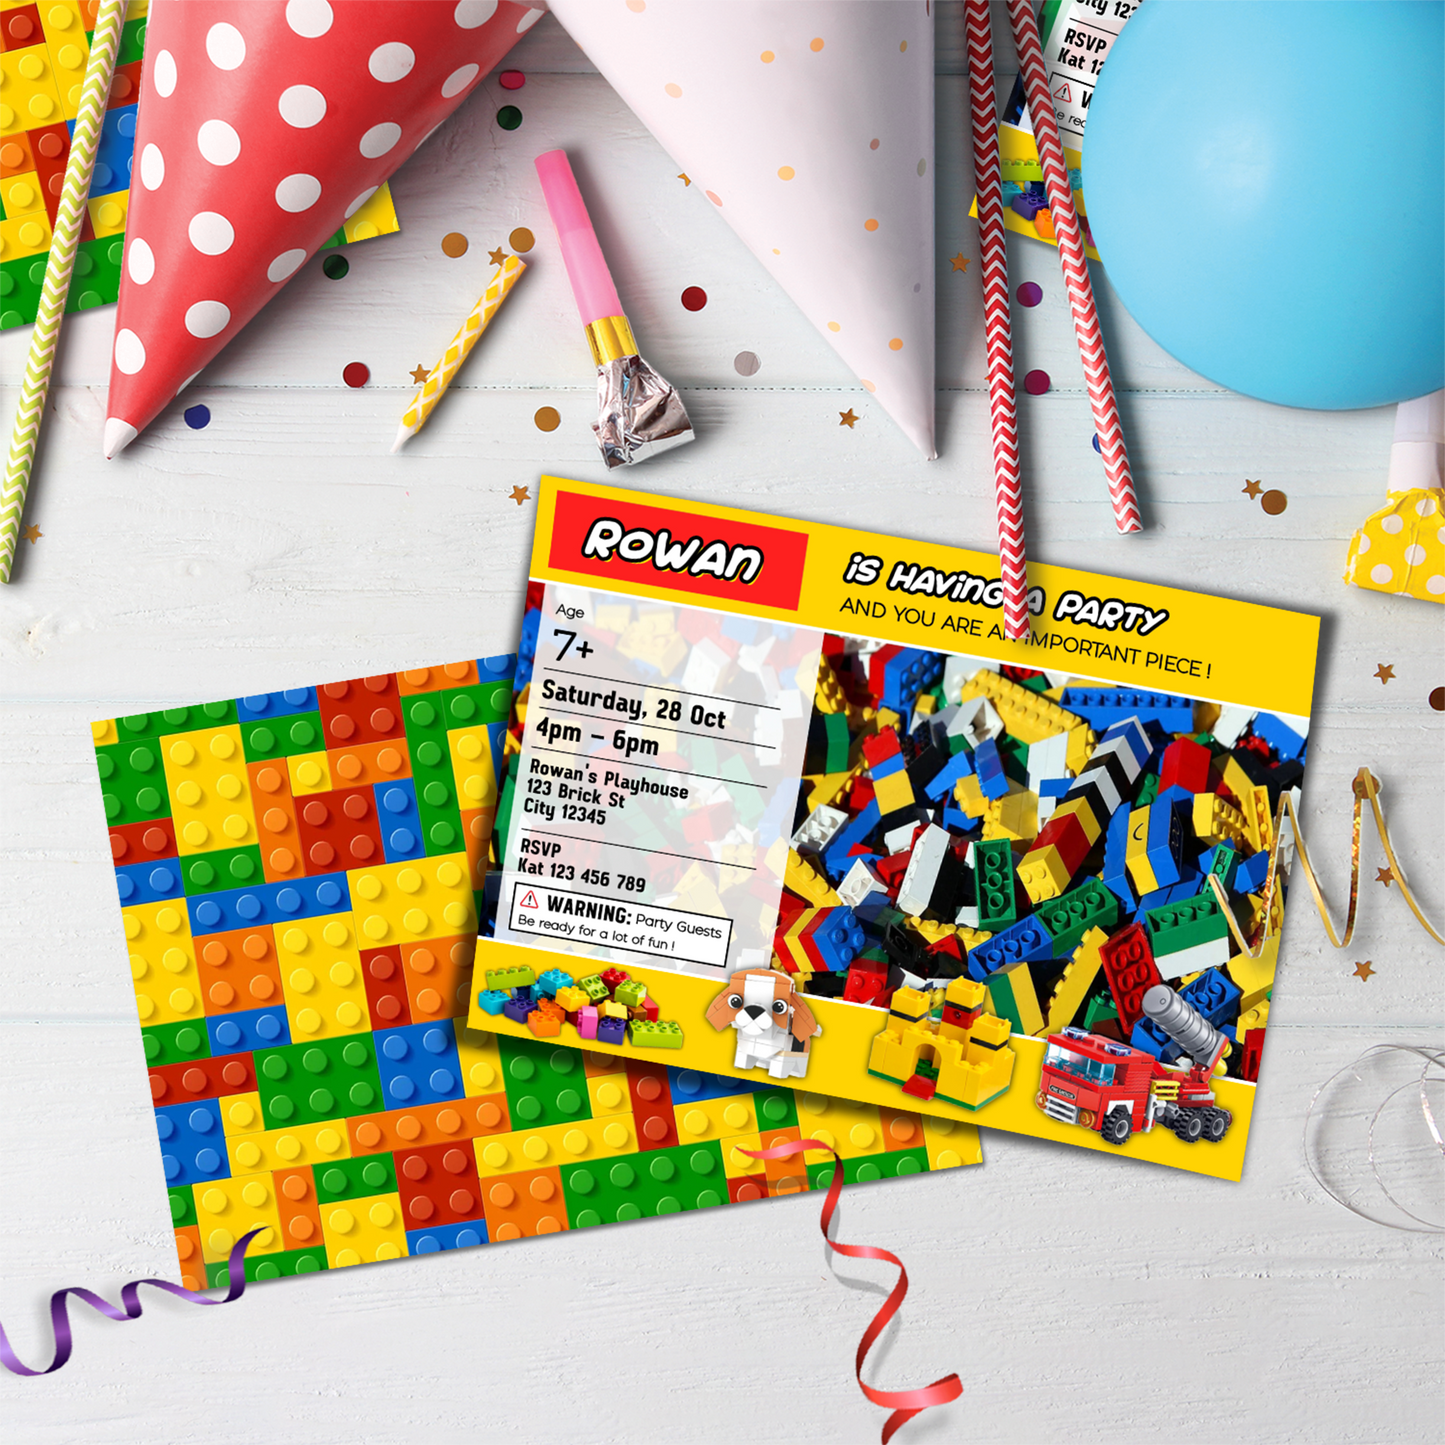 Personalized birthday card invitations with a Lego, Building Blocks theme